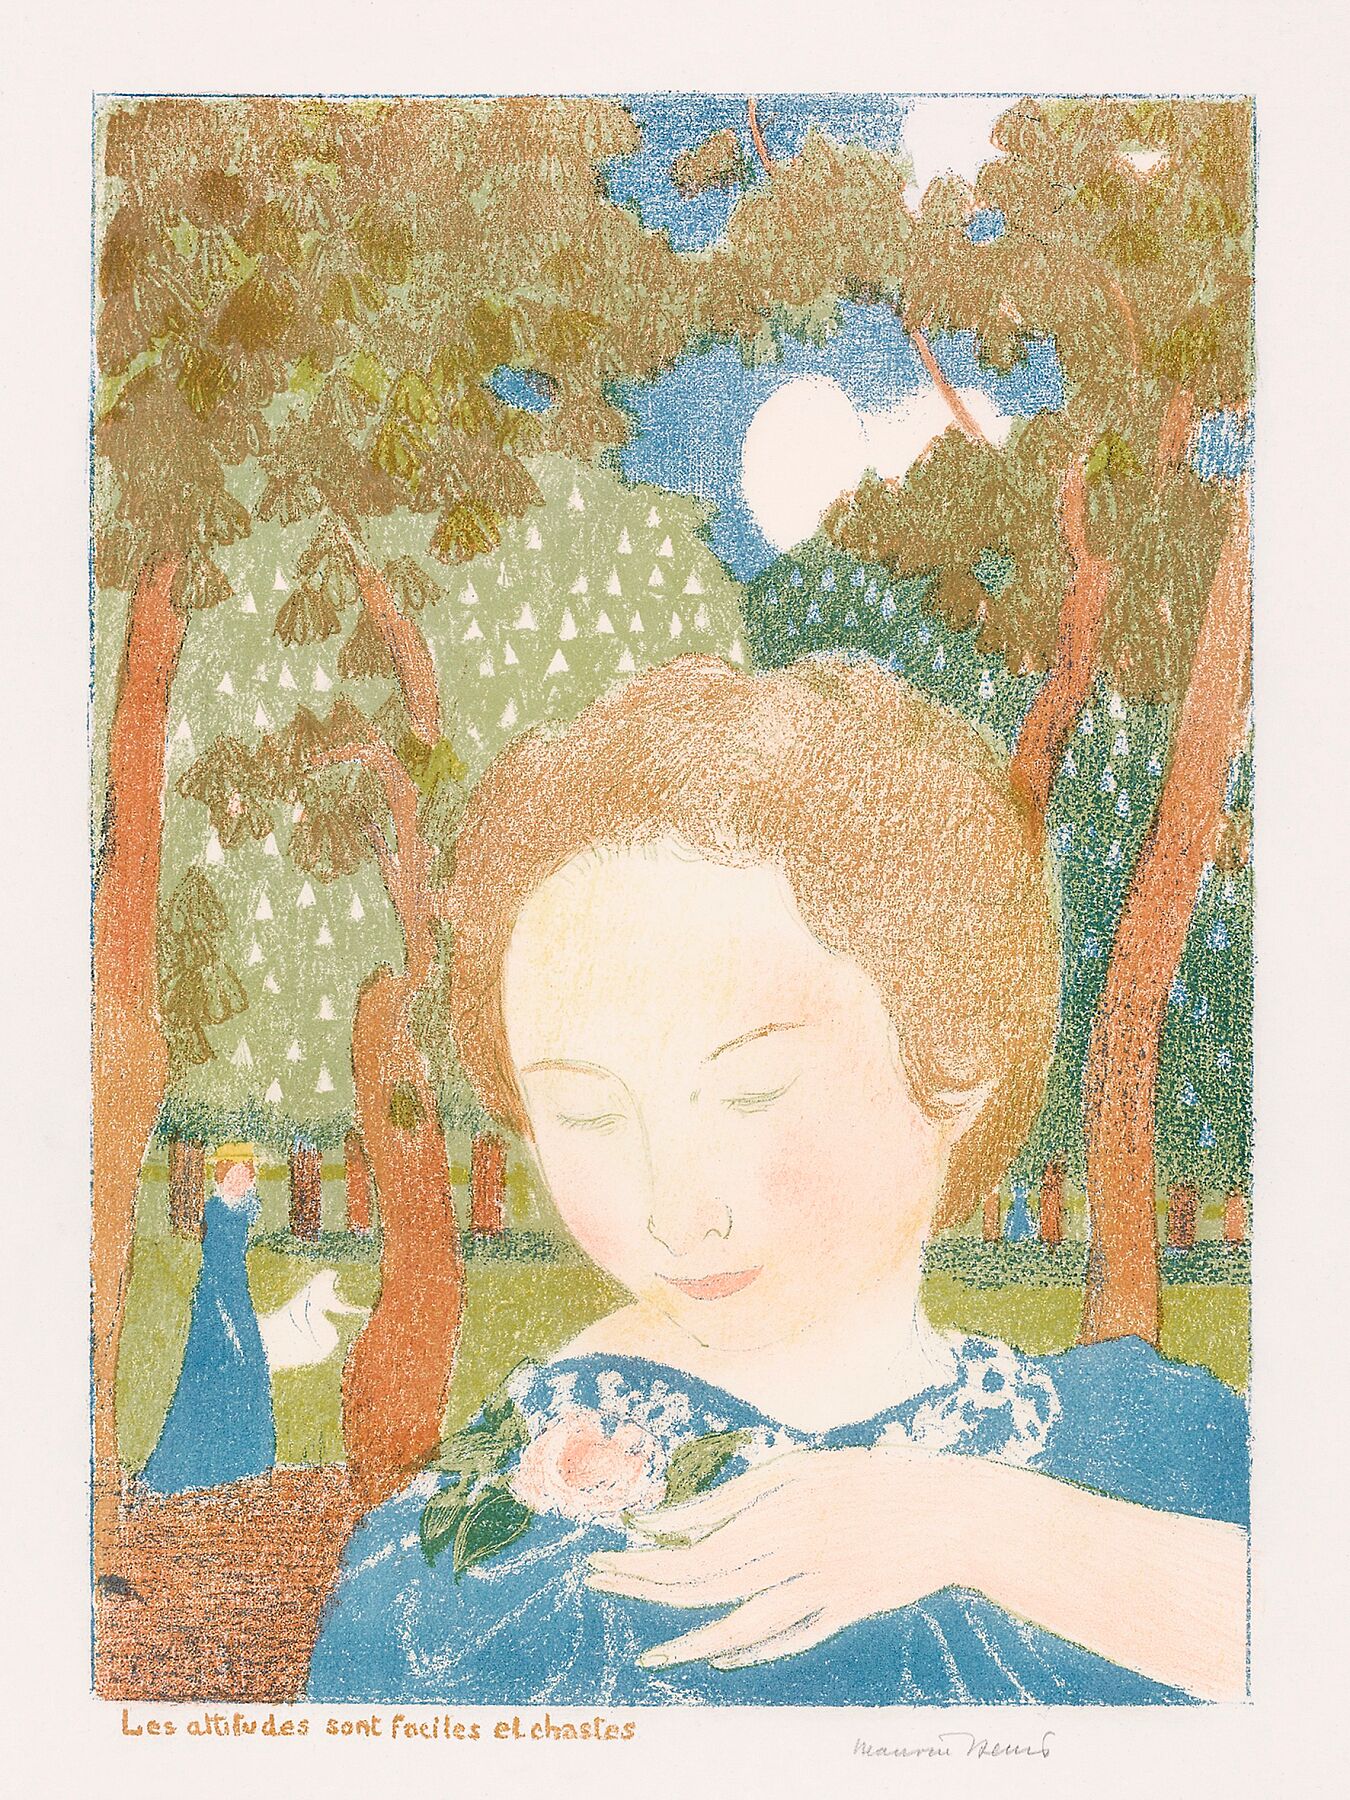 Attitudes are Easy and Chaste by Maurice Denis - 1899